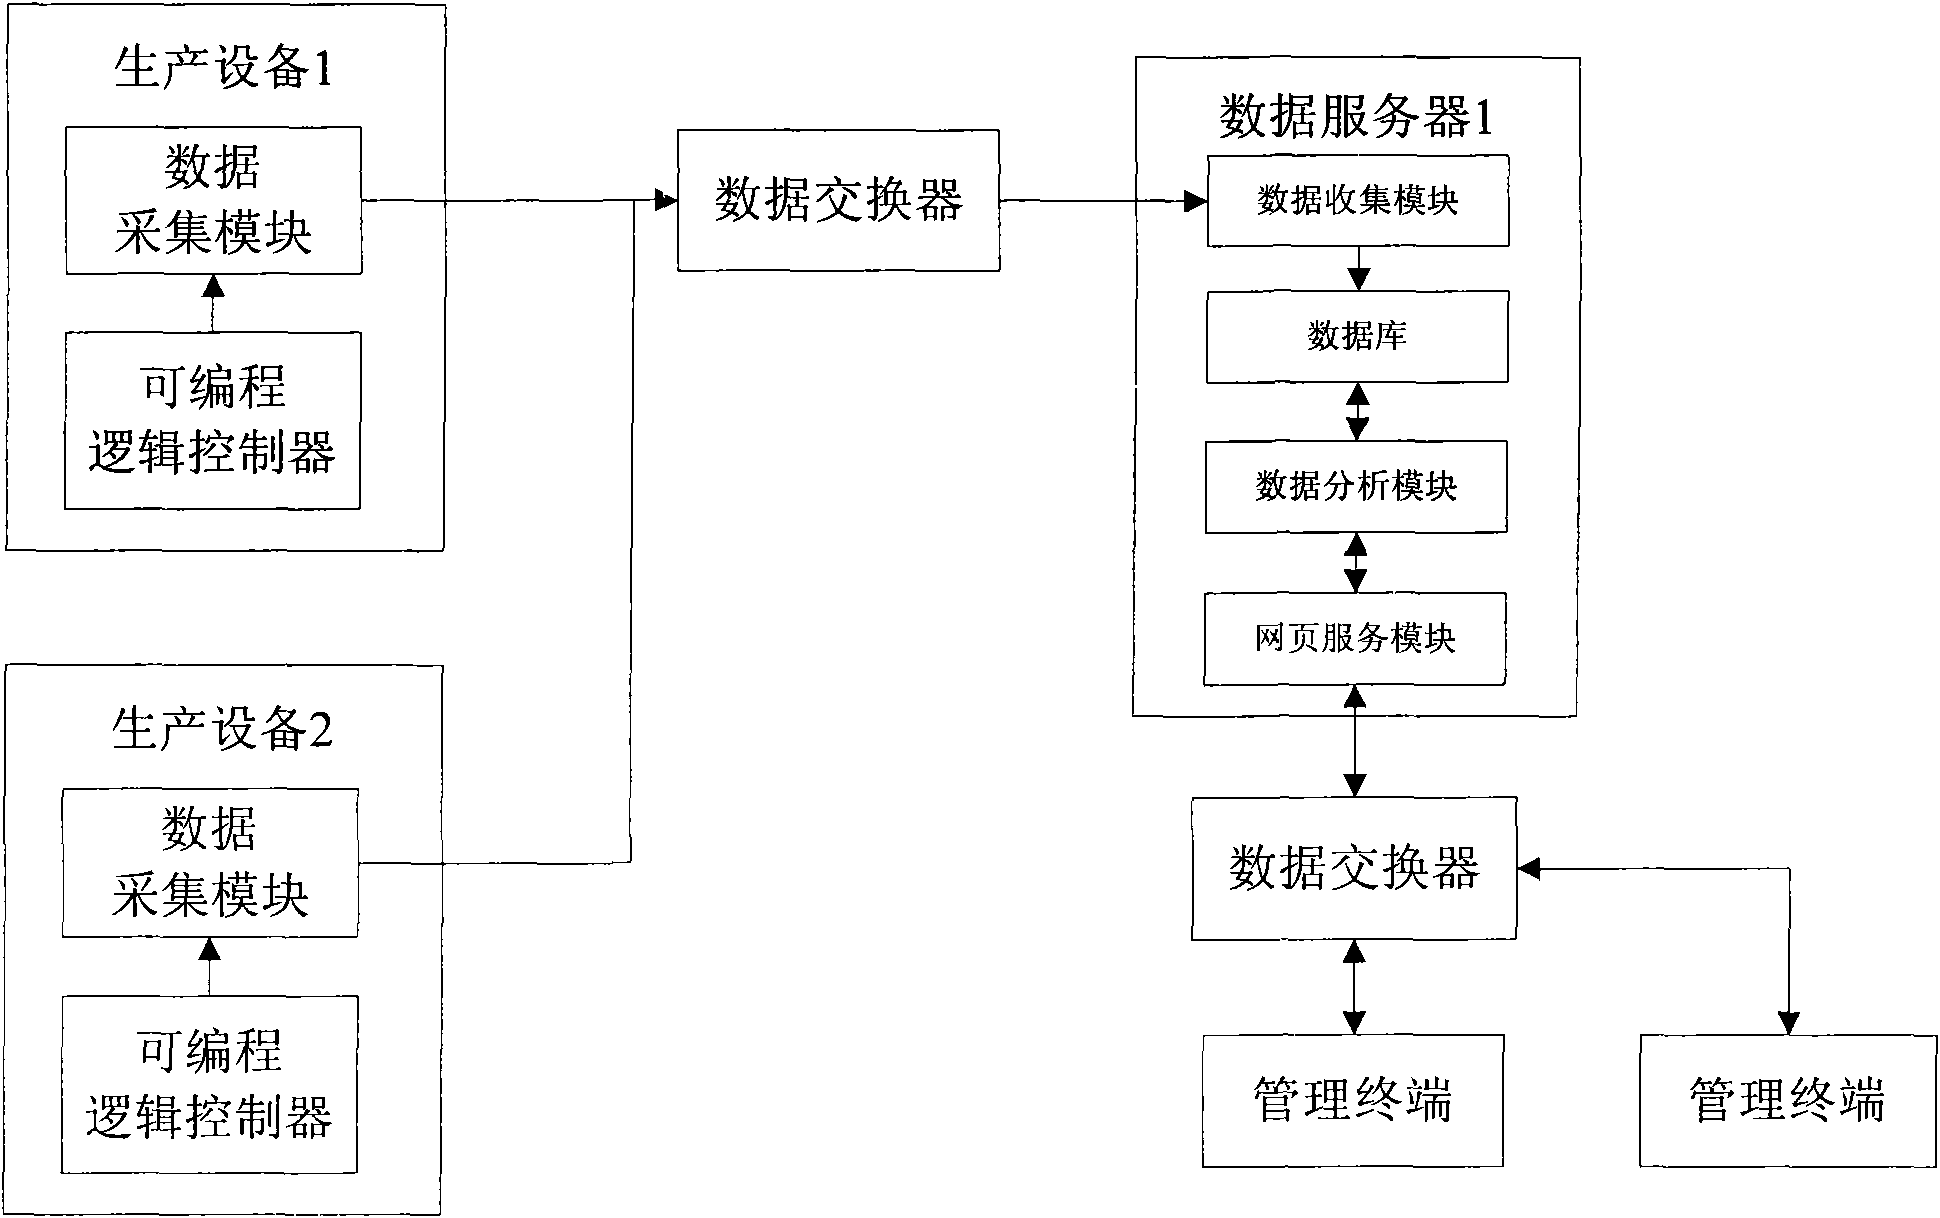 Automobile production information managing system